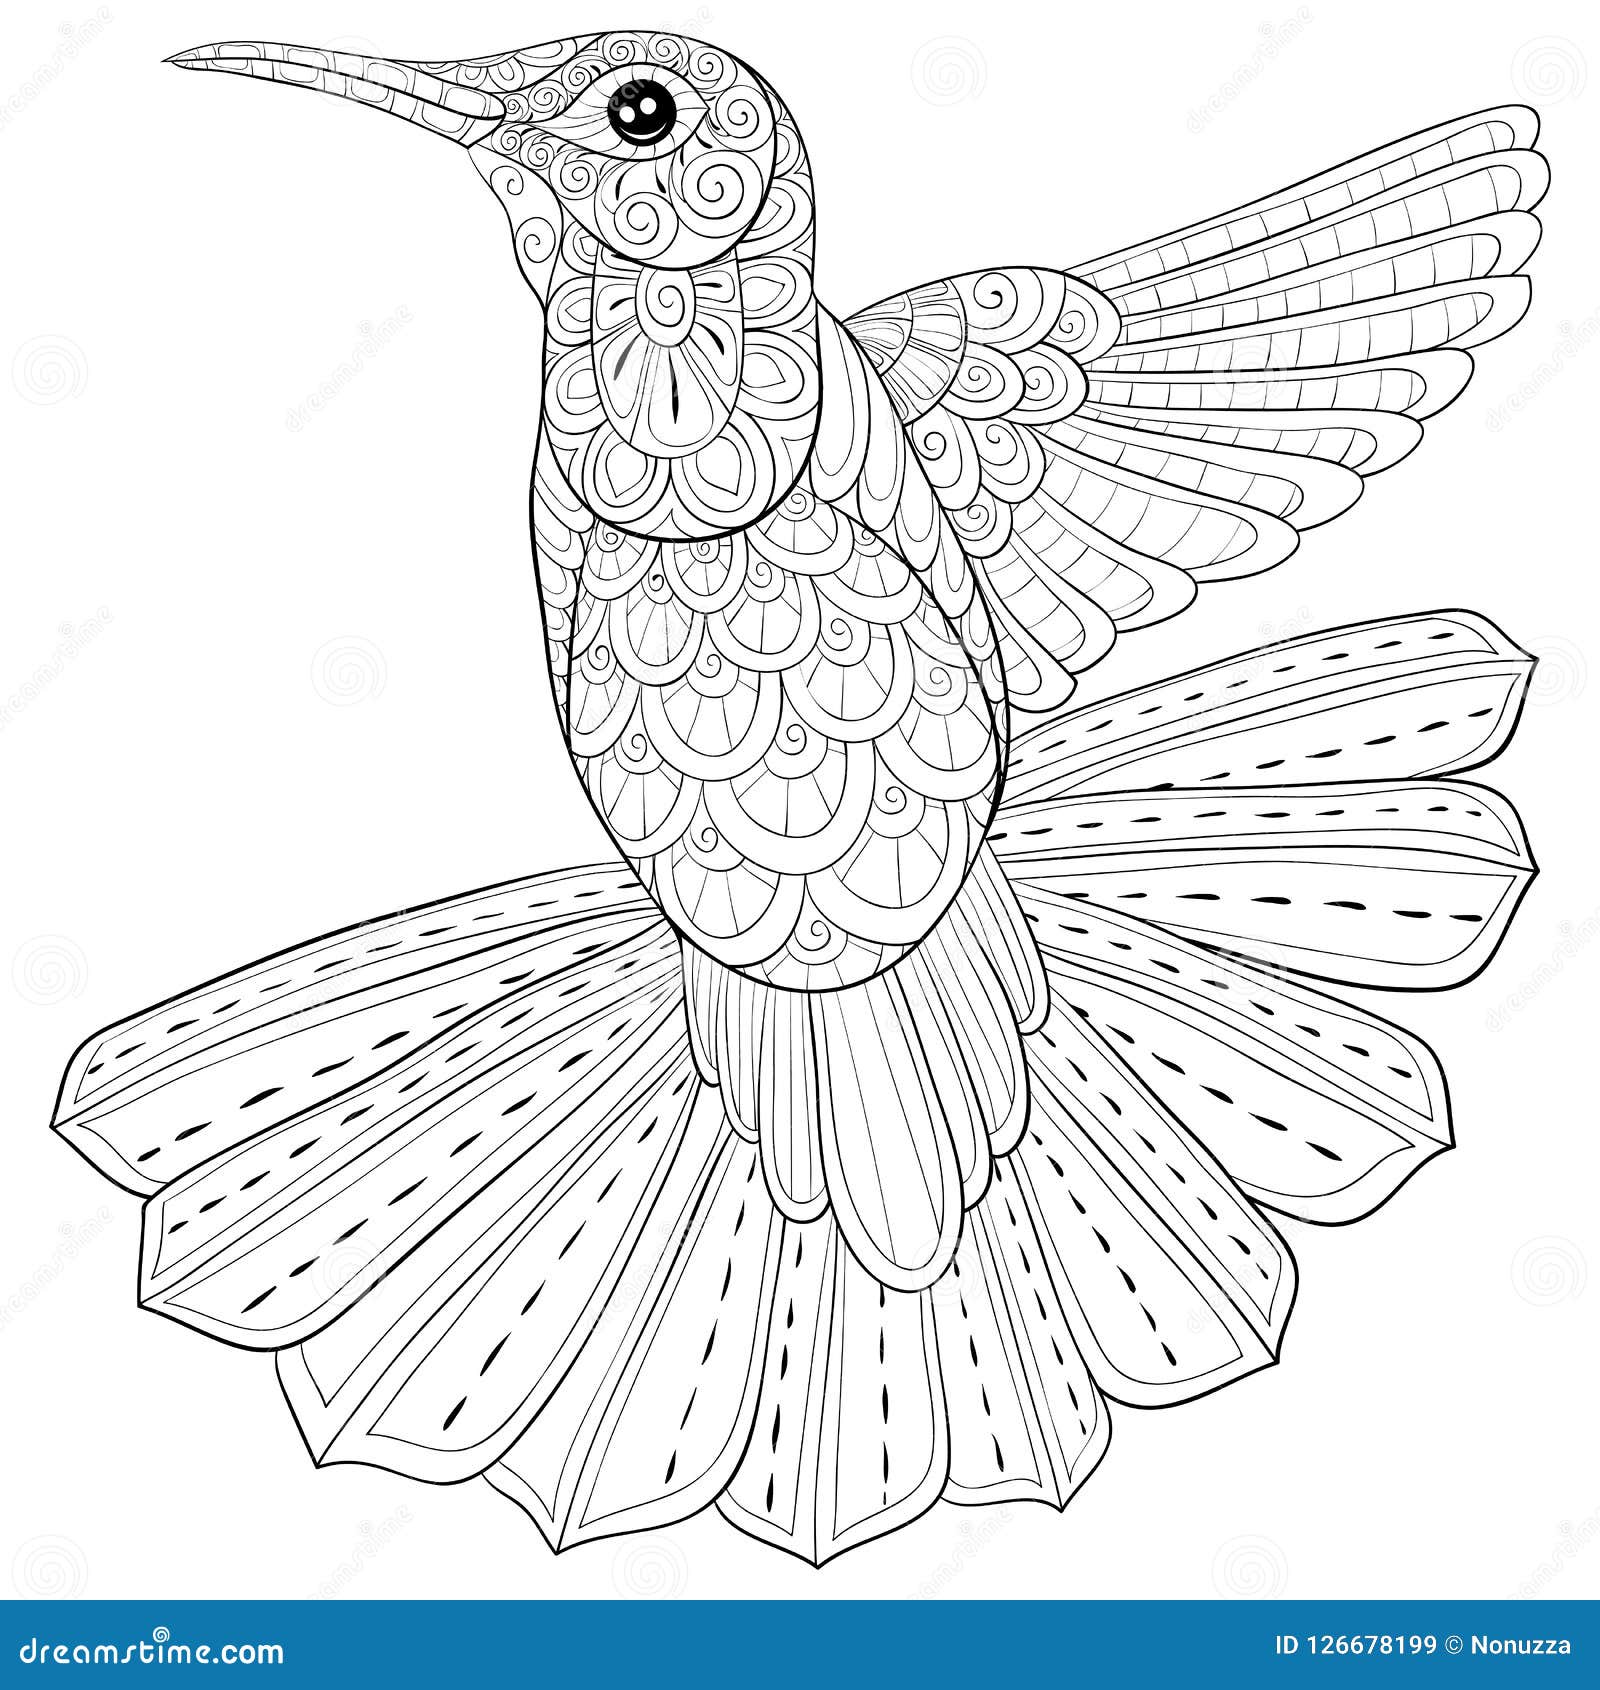 Adult coloring bookpage a cute hummingbird for relaxingzen art style illustration stock vector